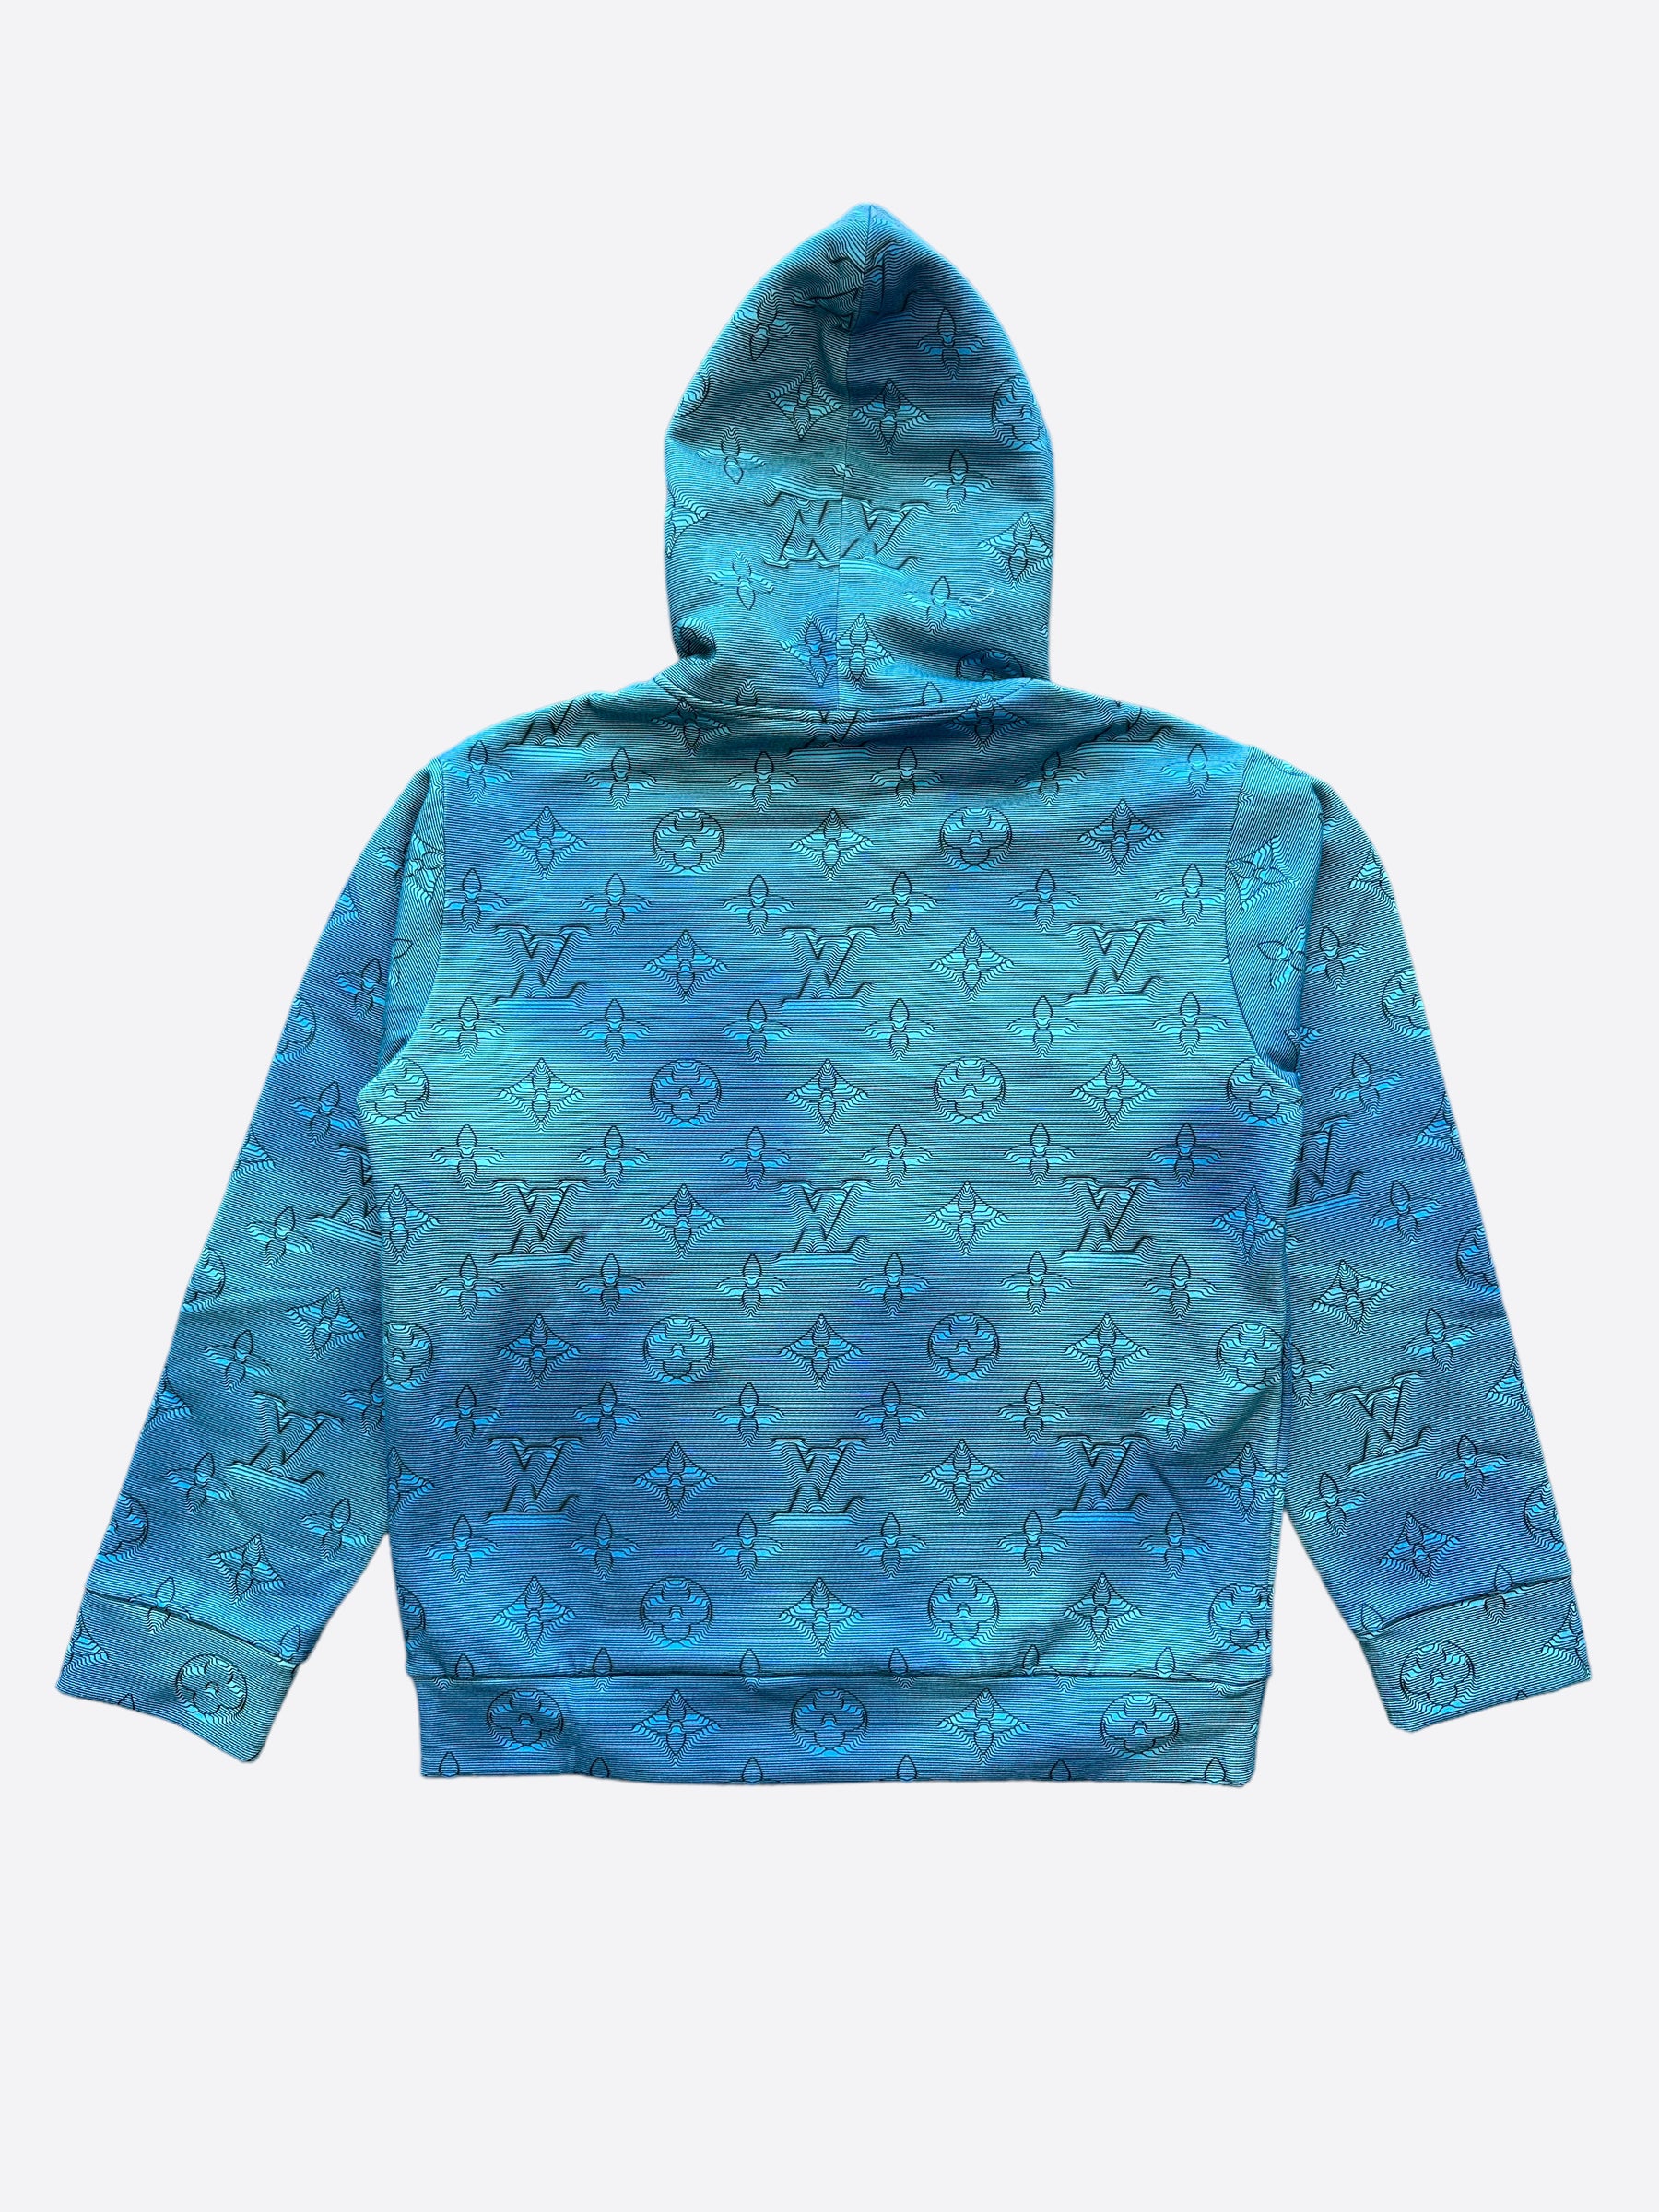 Louis Vuitton Printed Allover Hoodie 1AA4IN, Blue, L